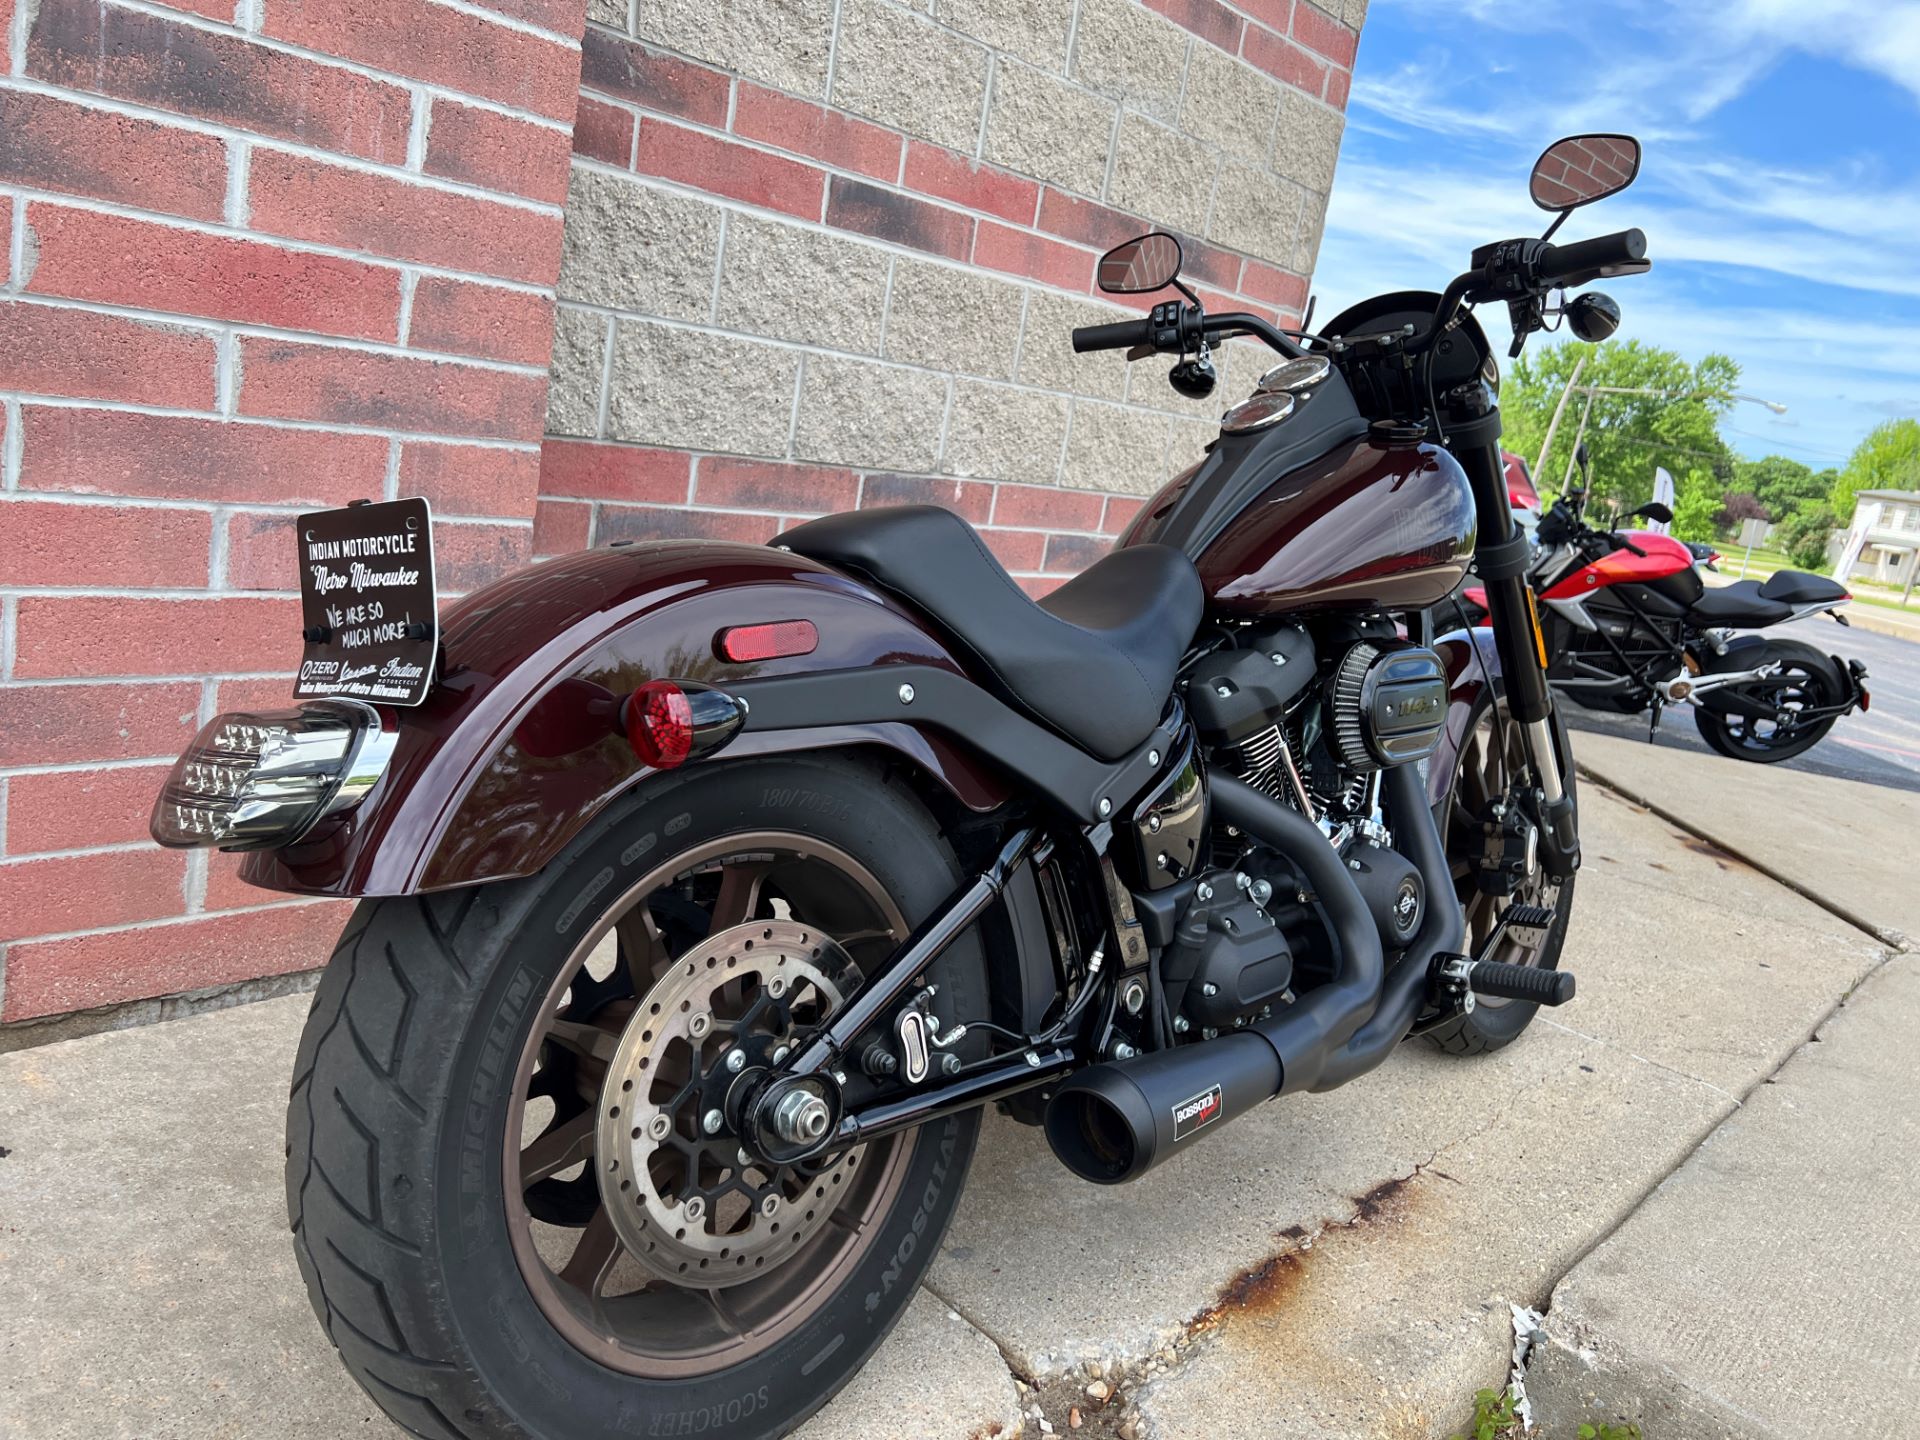 2021 Harley-Davidson Low Rider®S in Muskego, Wisconsin - Photo 9